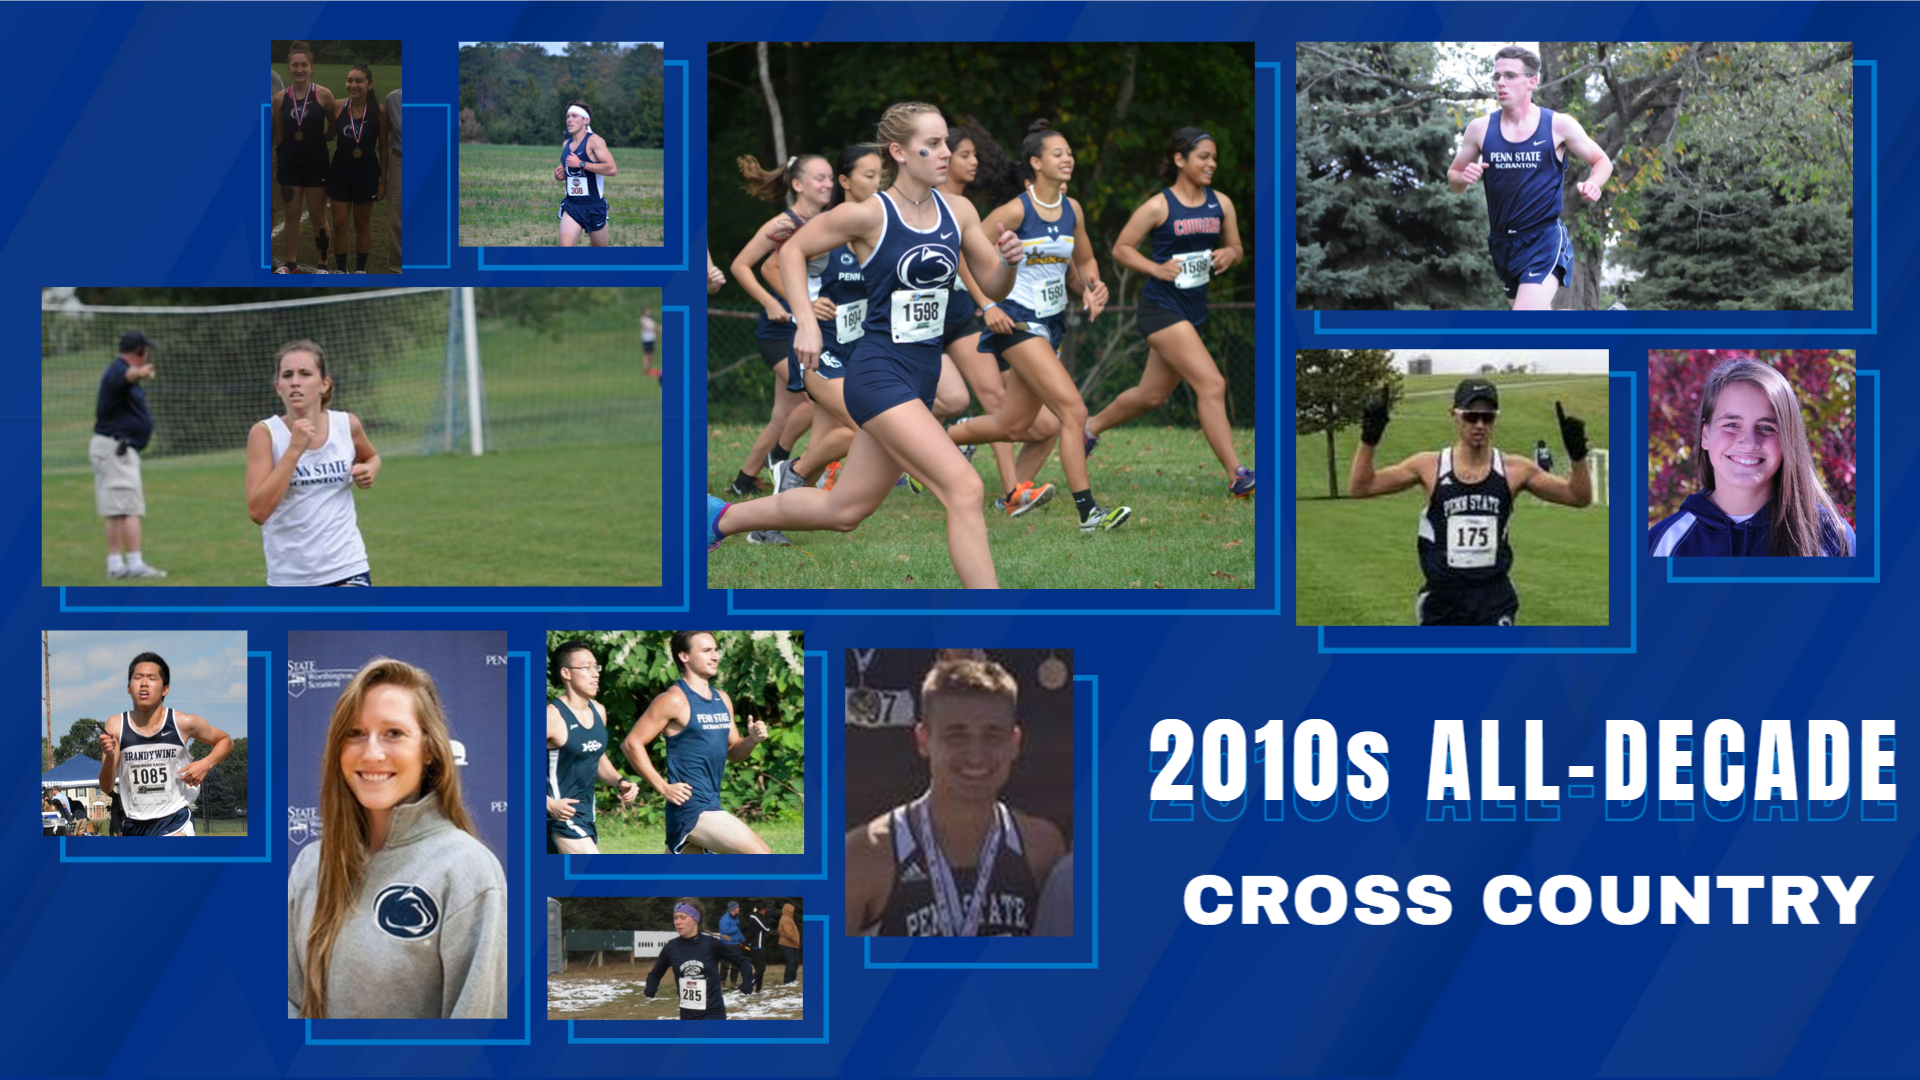 Penn State University Athletic Conference 2010s All-Decade Cross Country team was announced on August 11, 2021.